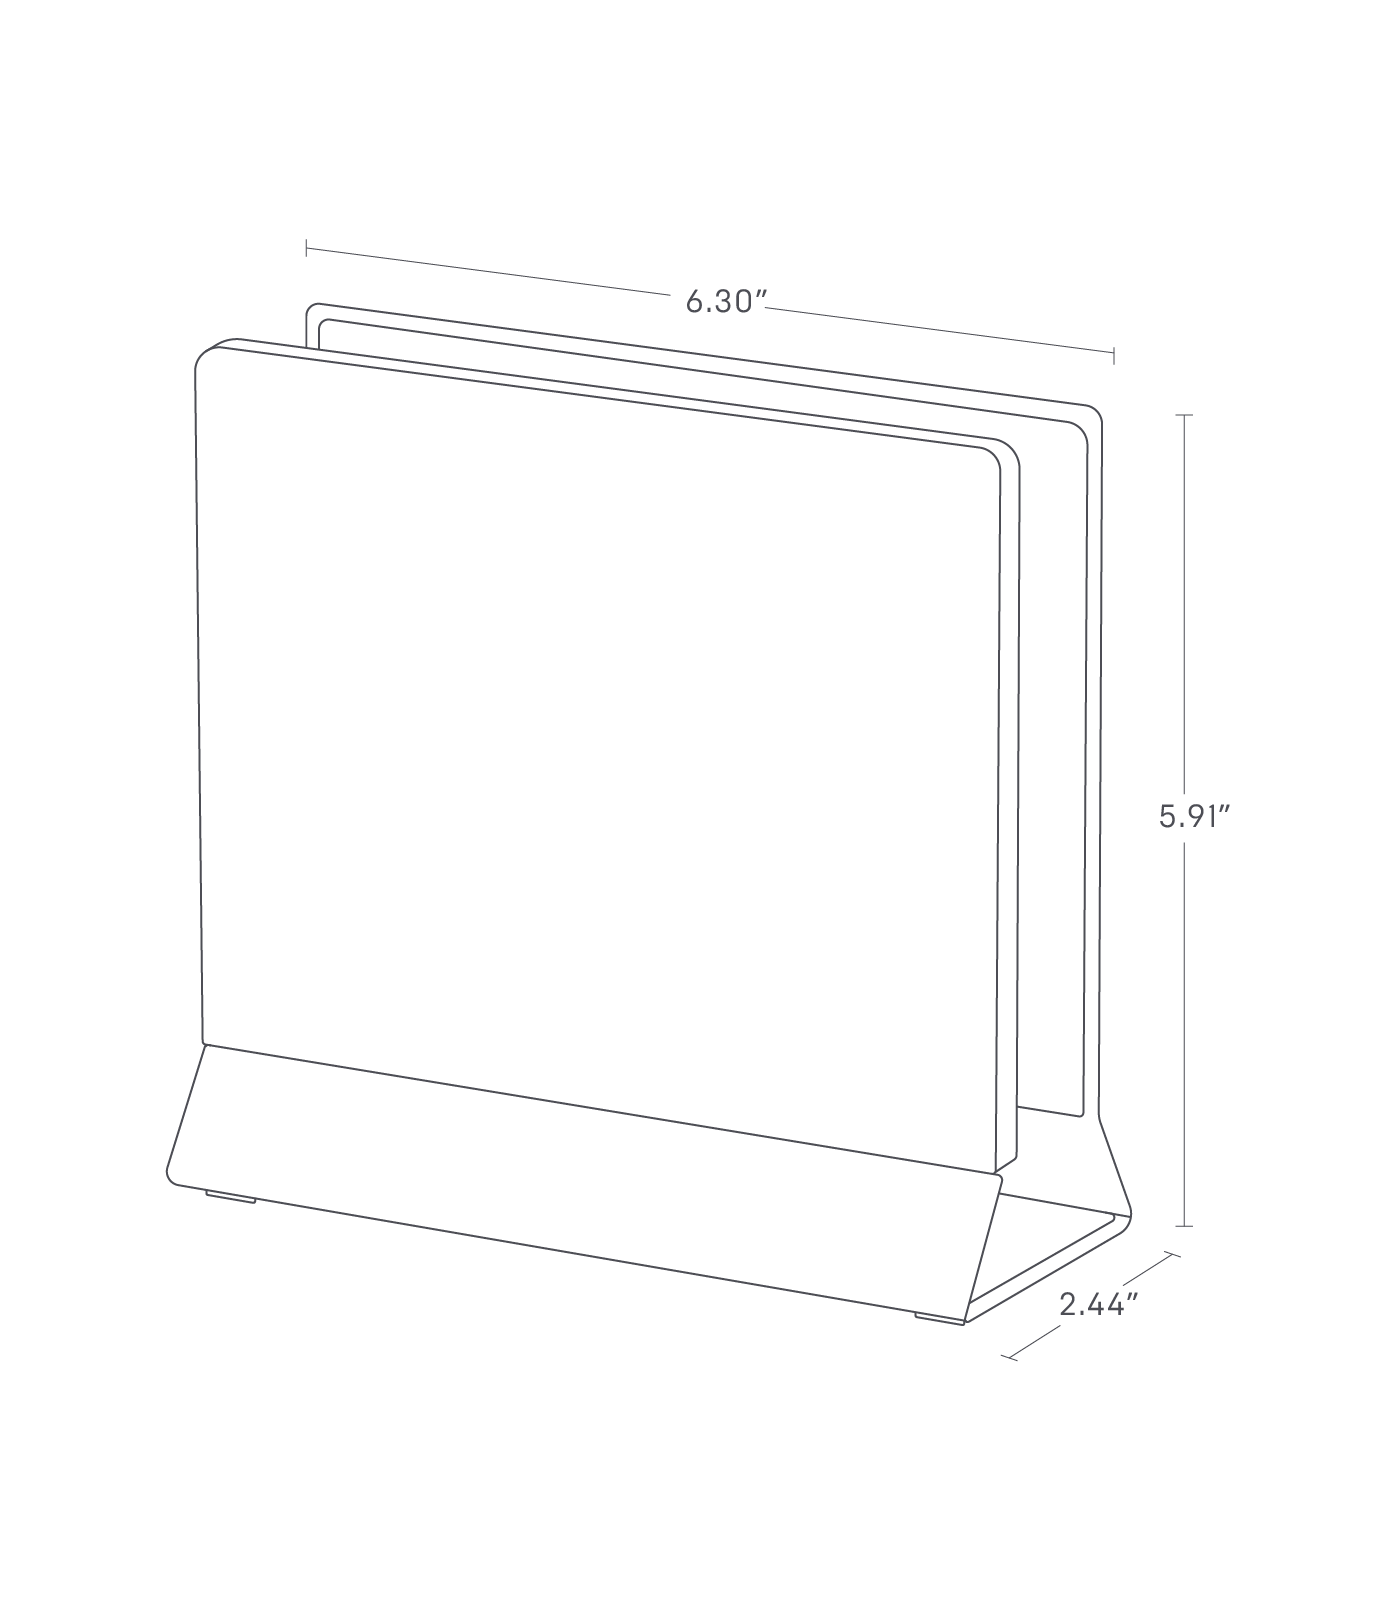 Dimension image for Slim Laptop Stand showing length of 6.30